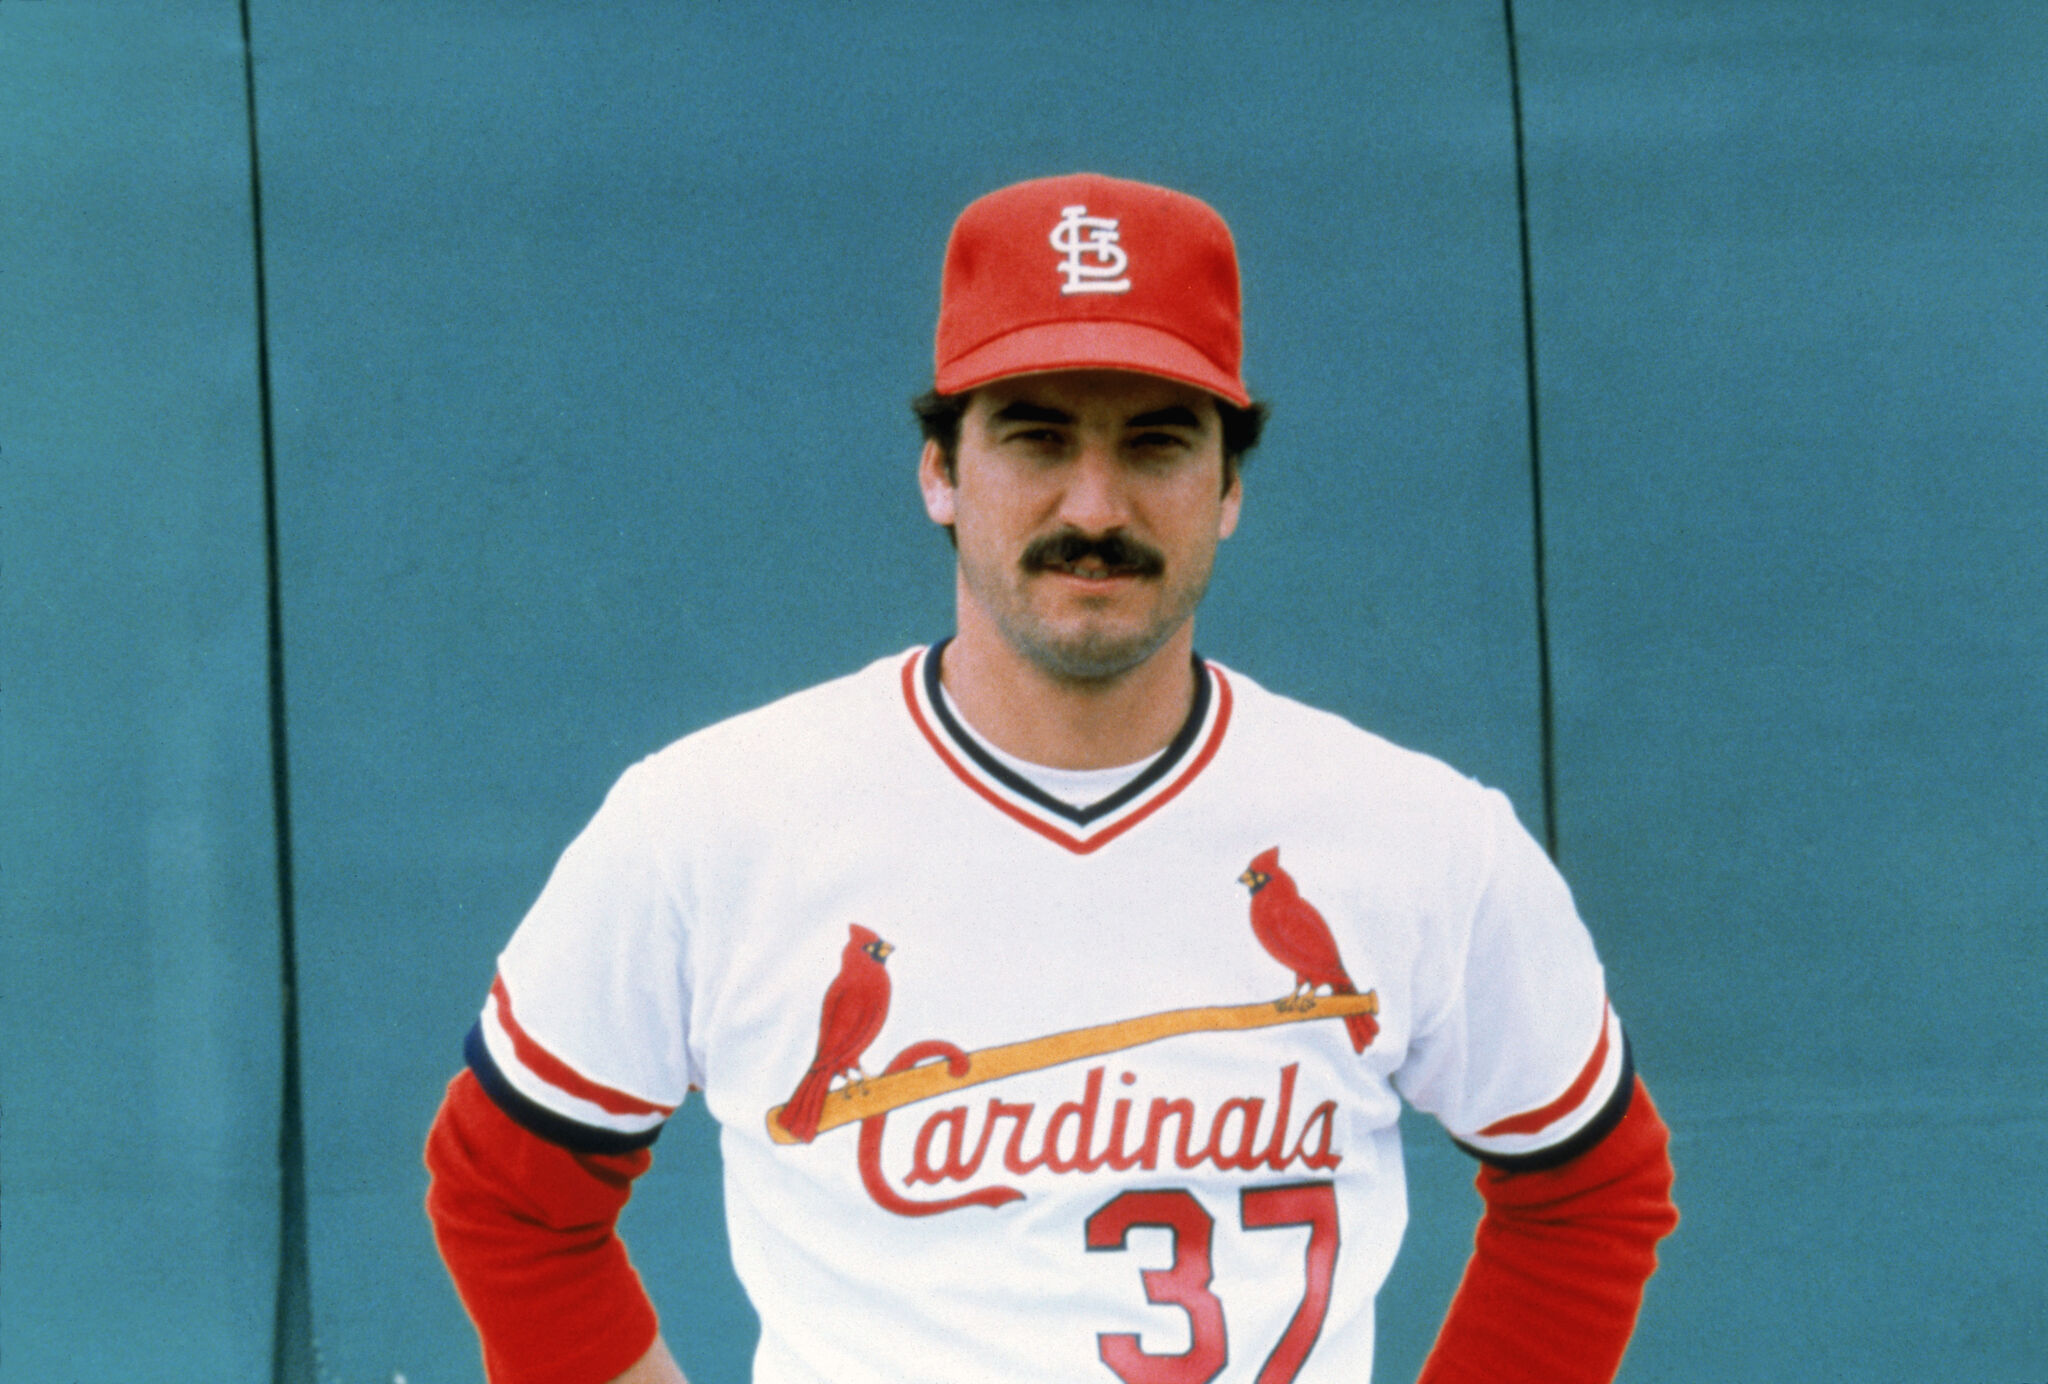 Keith Hernandez of the St. Louis Cardinals hits a single during